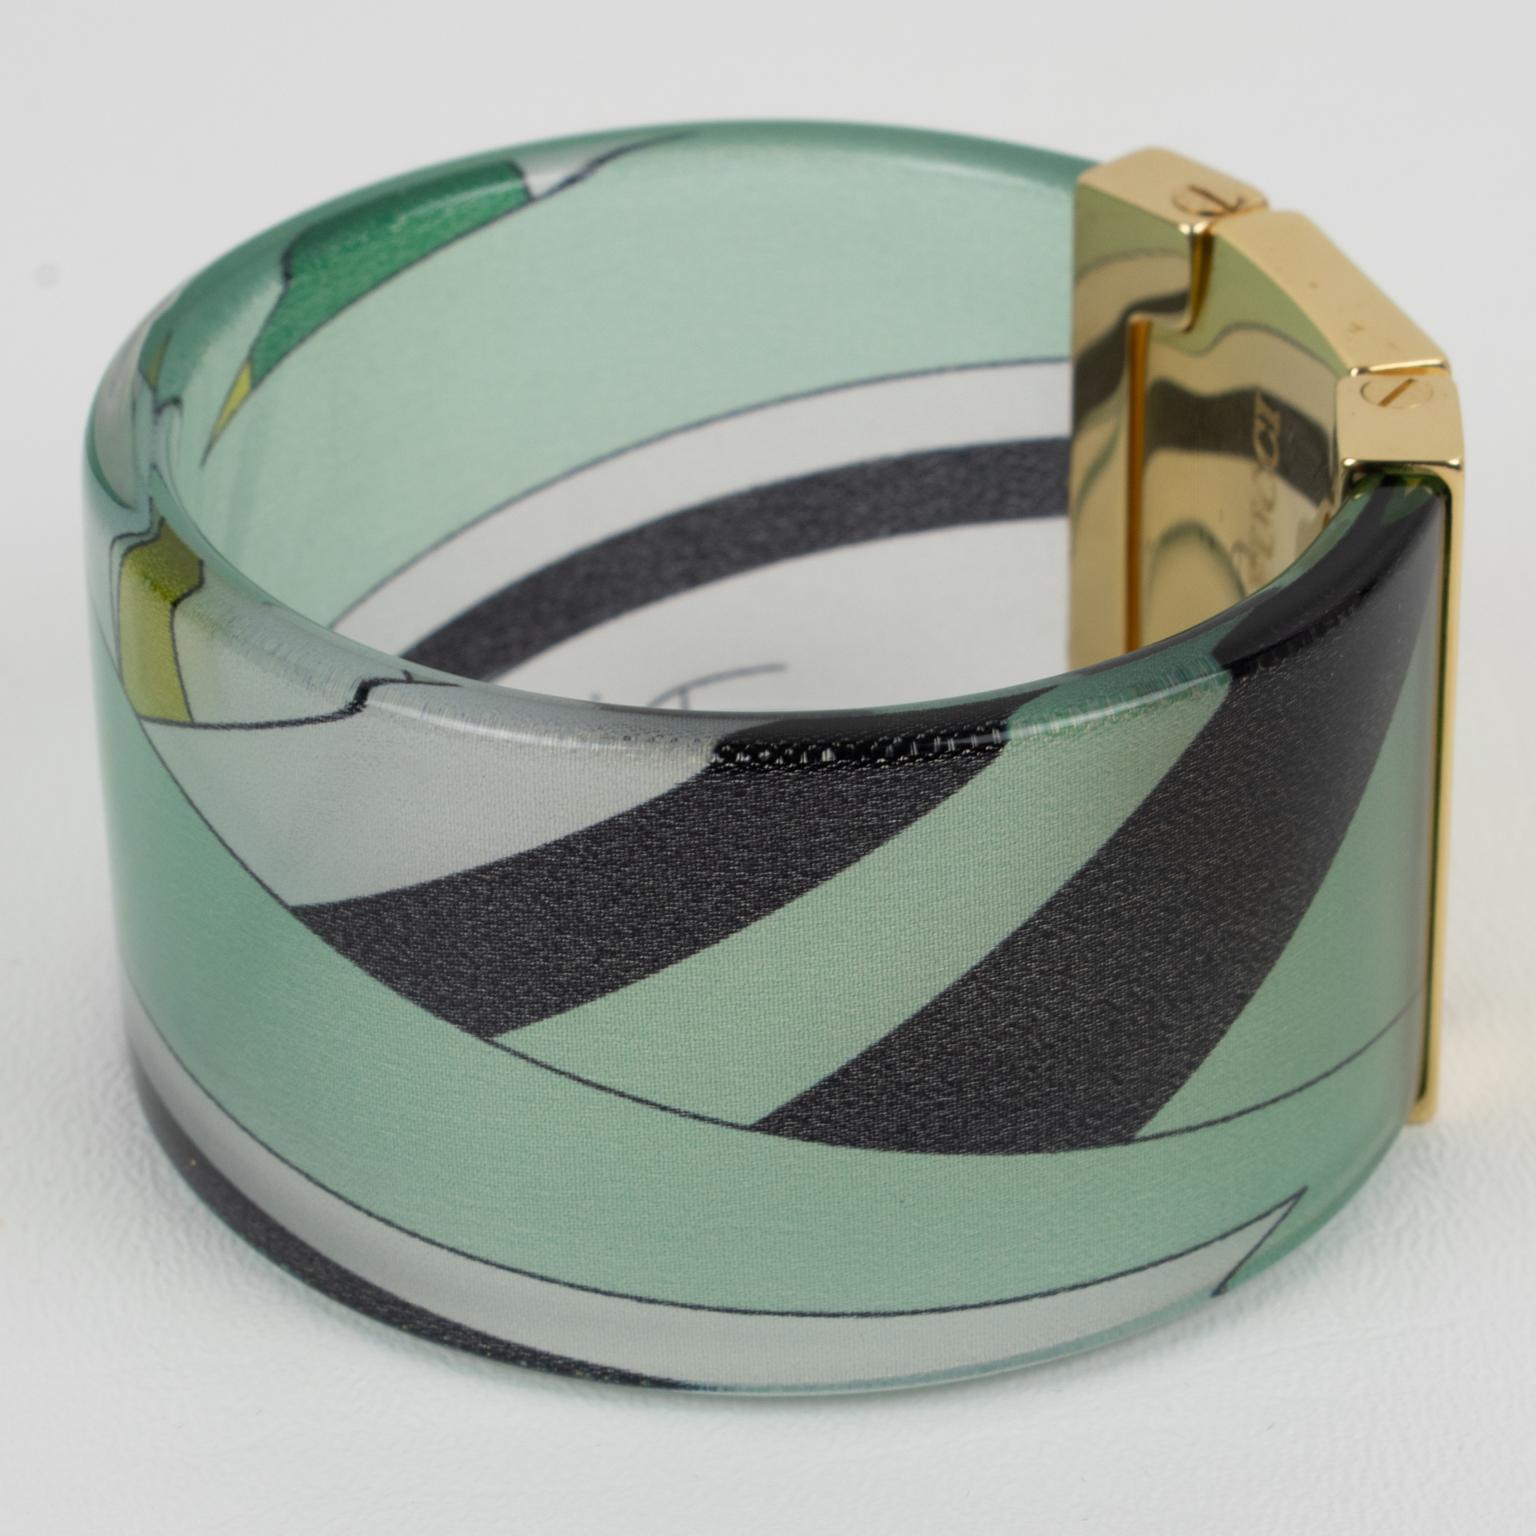 Emilio Pucci Jeweled Bracelet Bangle Lucite with Green and Black Silk Inclusion For Sale 4